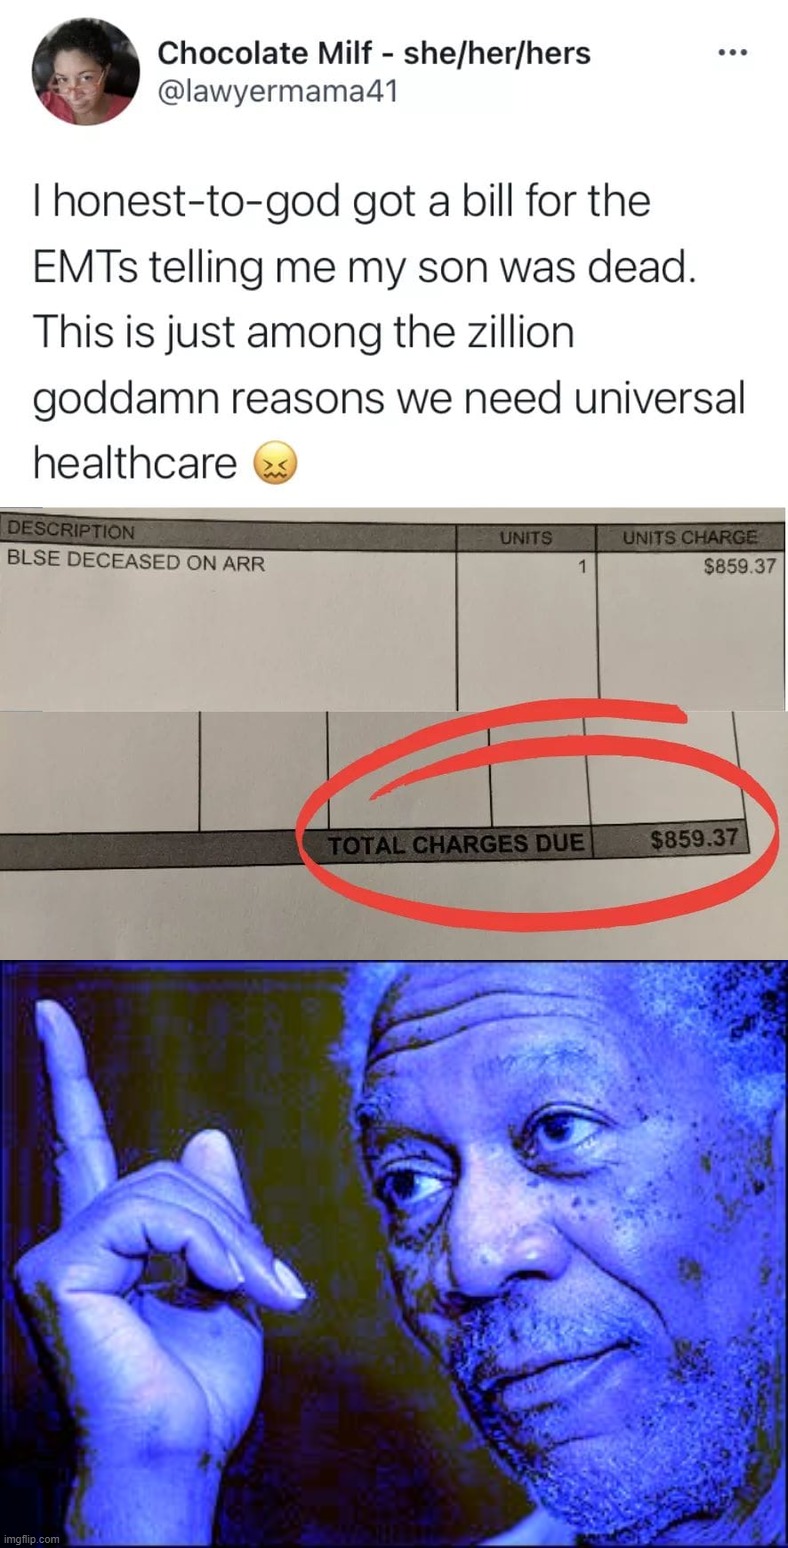 #BlackLivesMatter ain't just about the police | image tagged in emt bill dead son,morgan freeman this blue version,blm,universal,healthcare,black lives matter | made w/ Imgflip meme maker